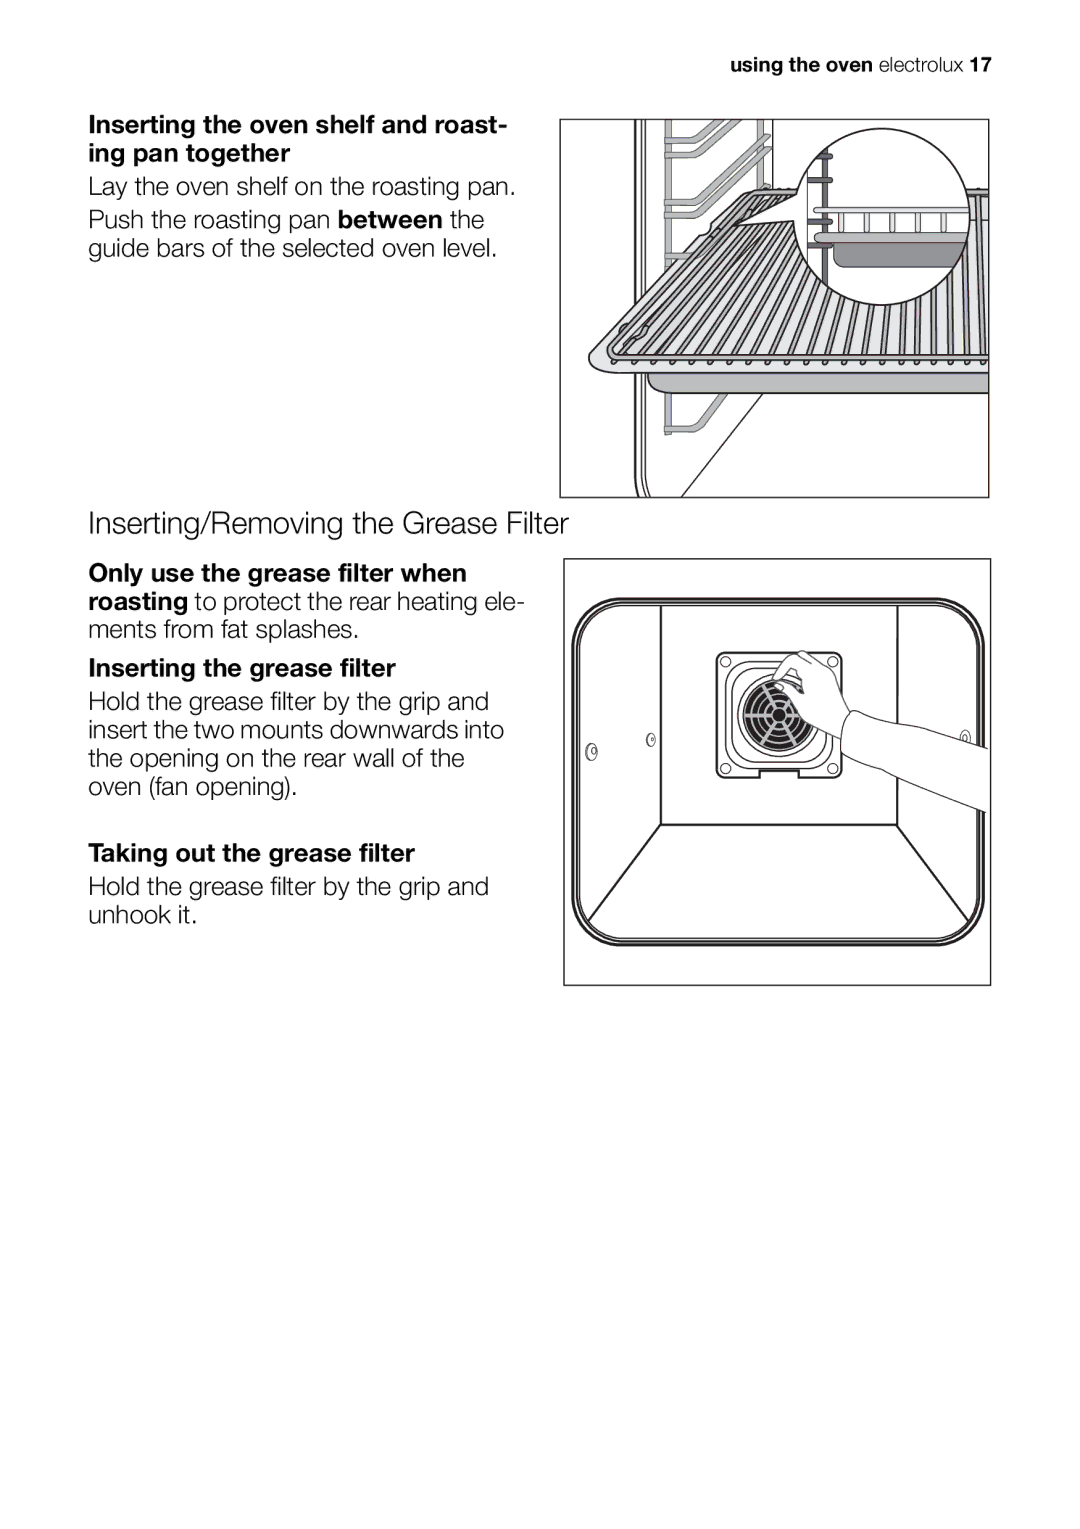 Electrolux EOC65101 user manual Inserting/Removing the Grease Filter 